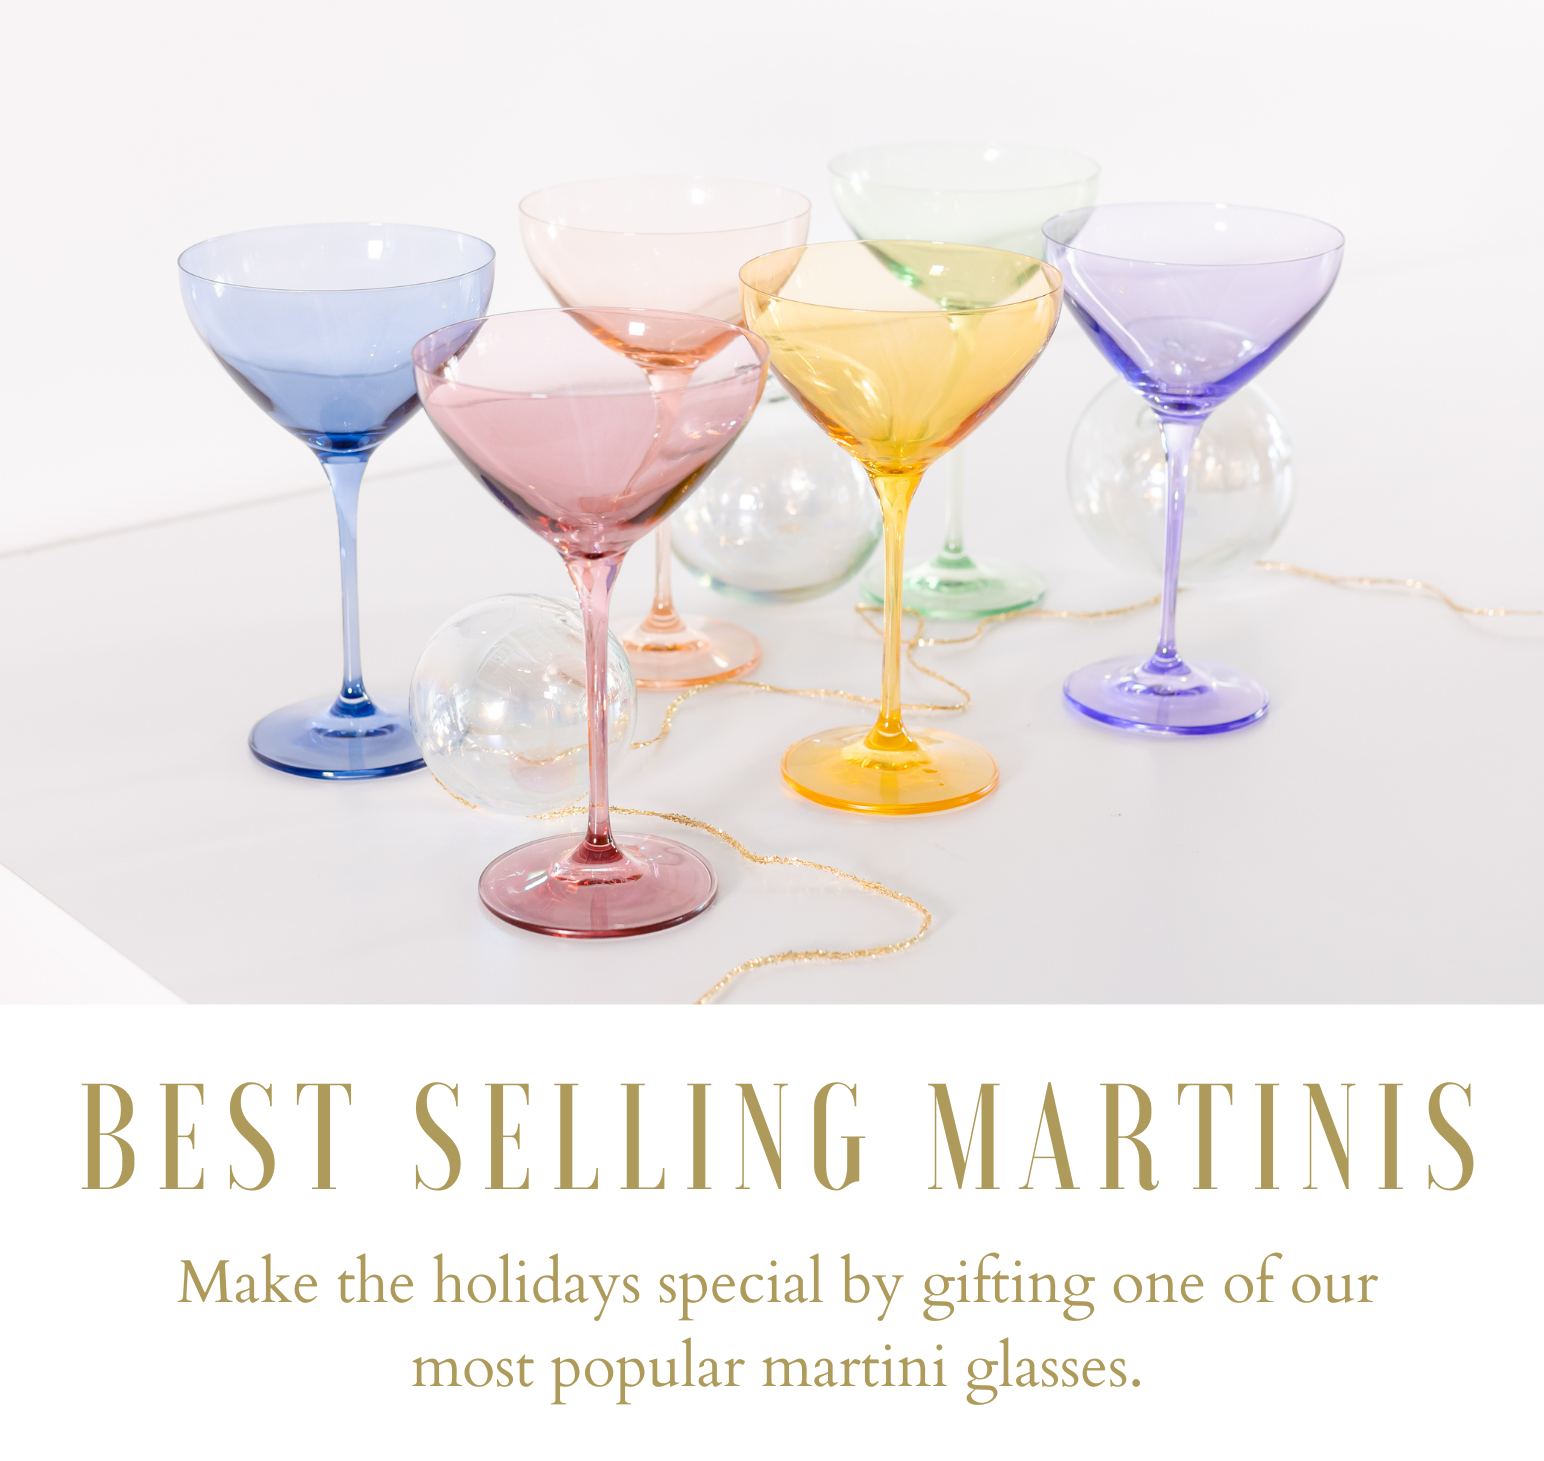 Shop Our Top Selling Martinis